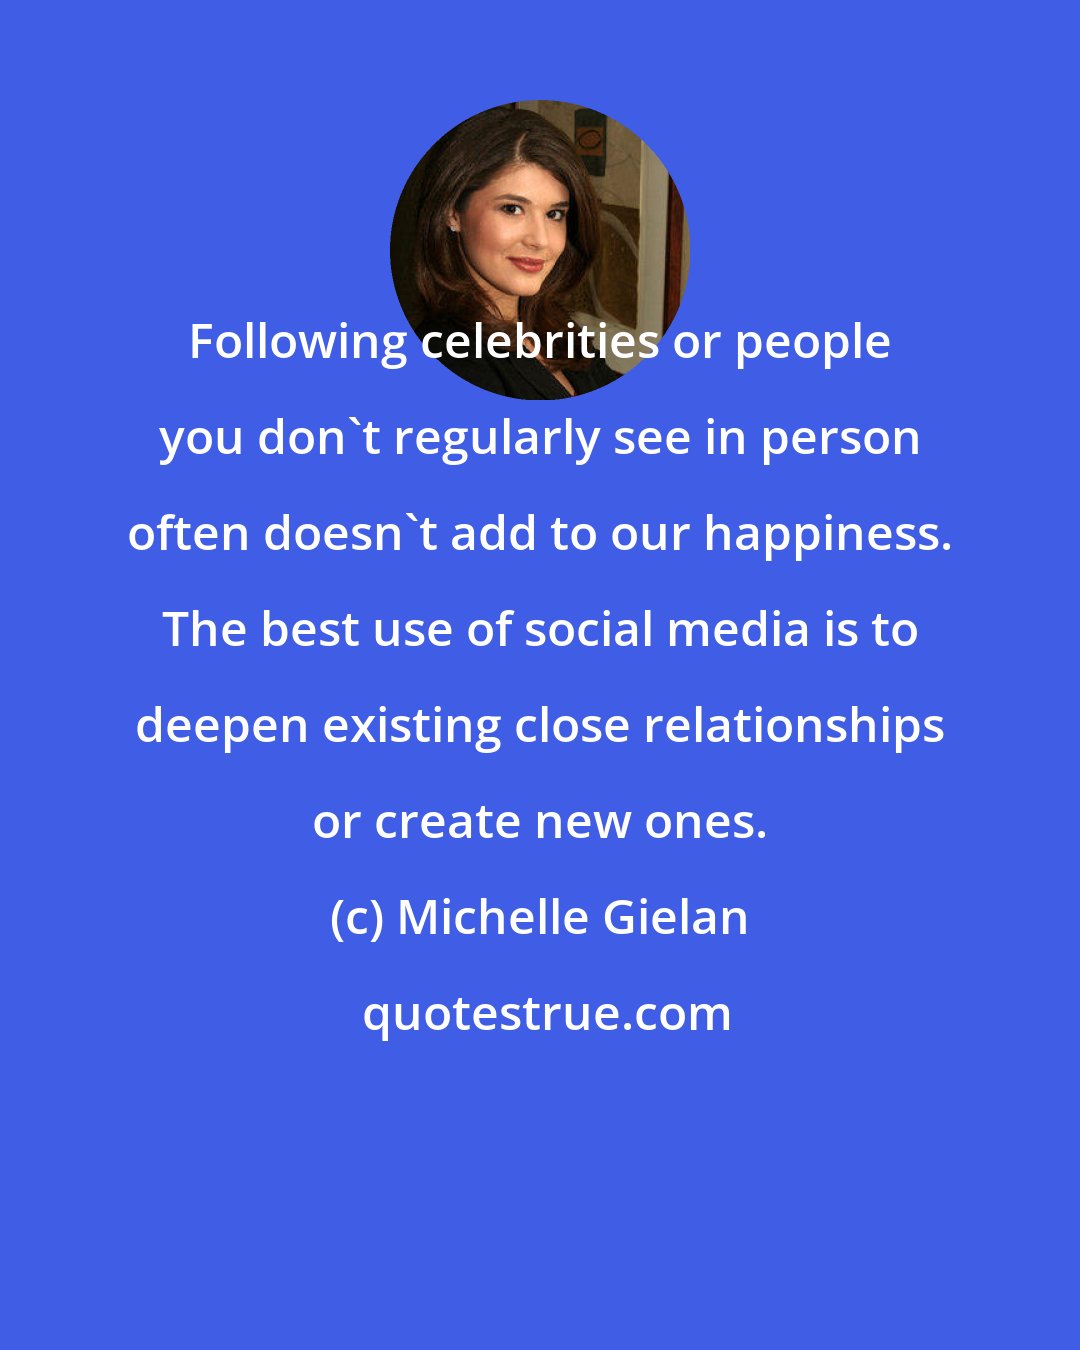 Michelle Gielan: Following celebrities or people you don't regularly see in person often doesn't add to our happiness. The best use of social media is to deepen existing close relationships or create new ones.